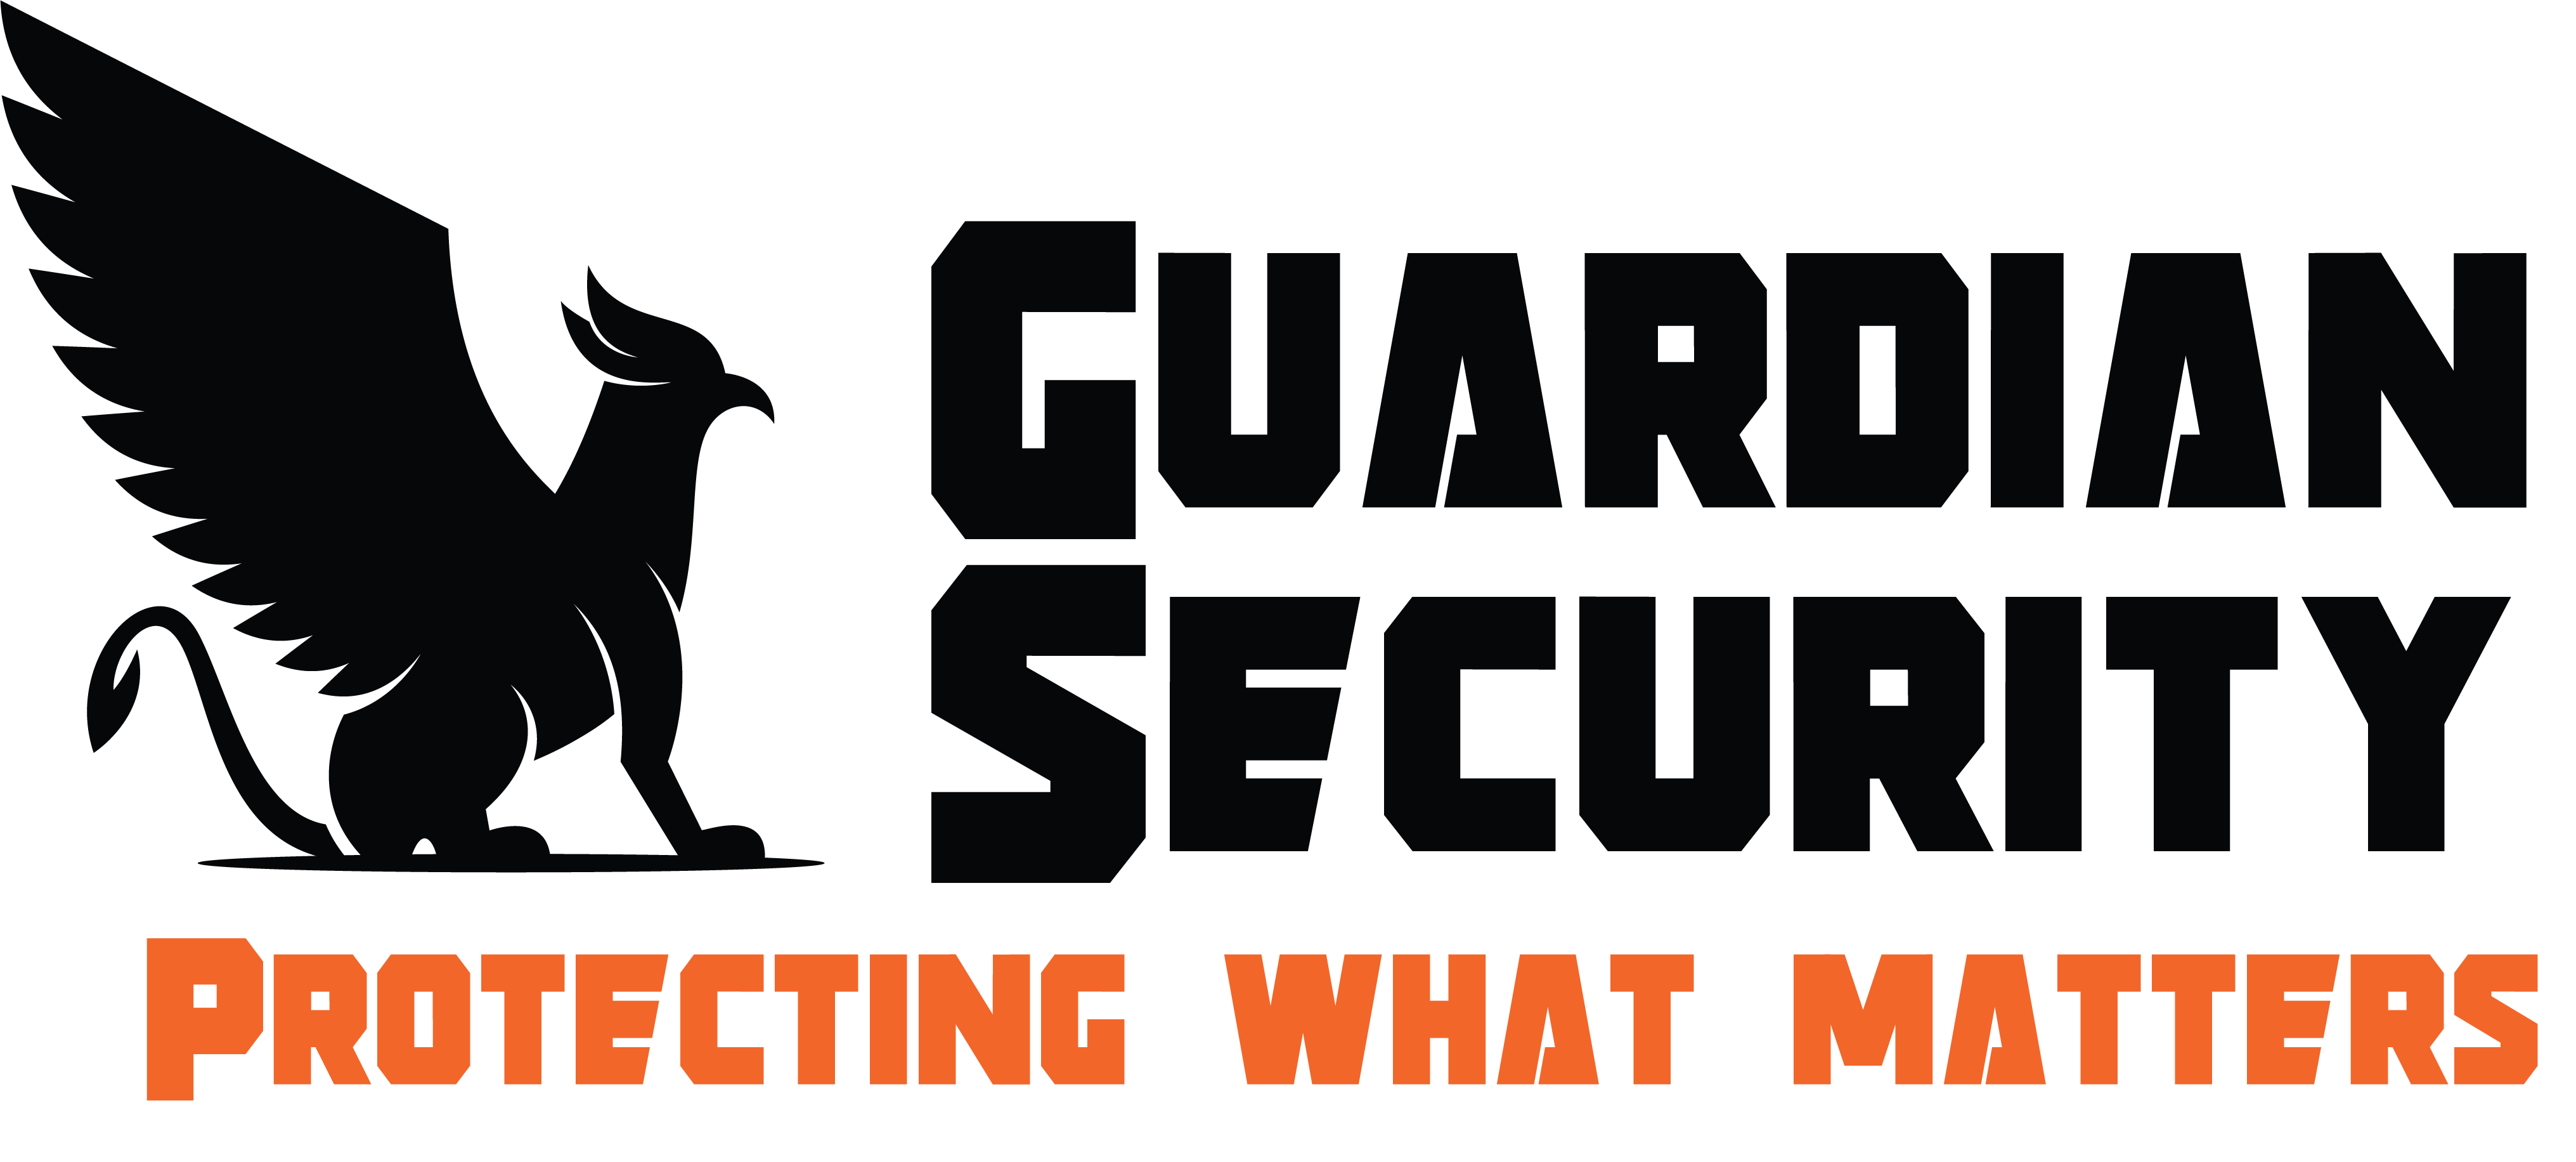 Guardian Security Screens in Utah, from the Wasatch front to St George